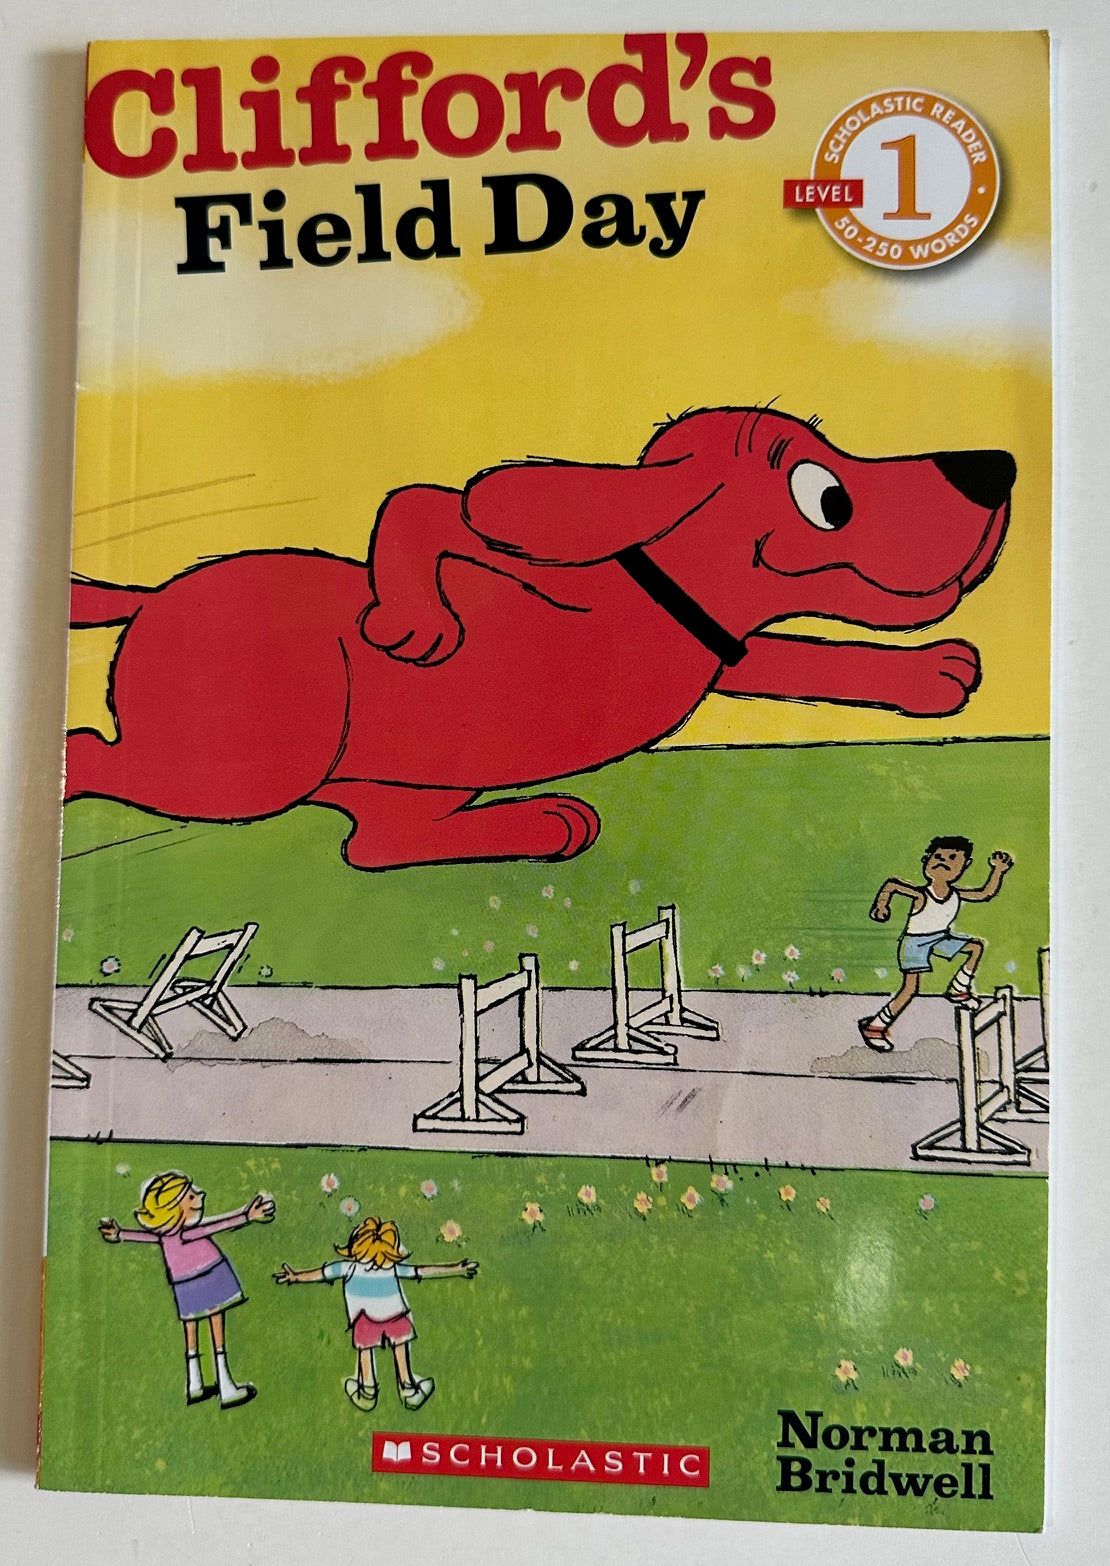 "Clifford's Field Day"